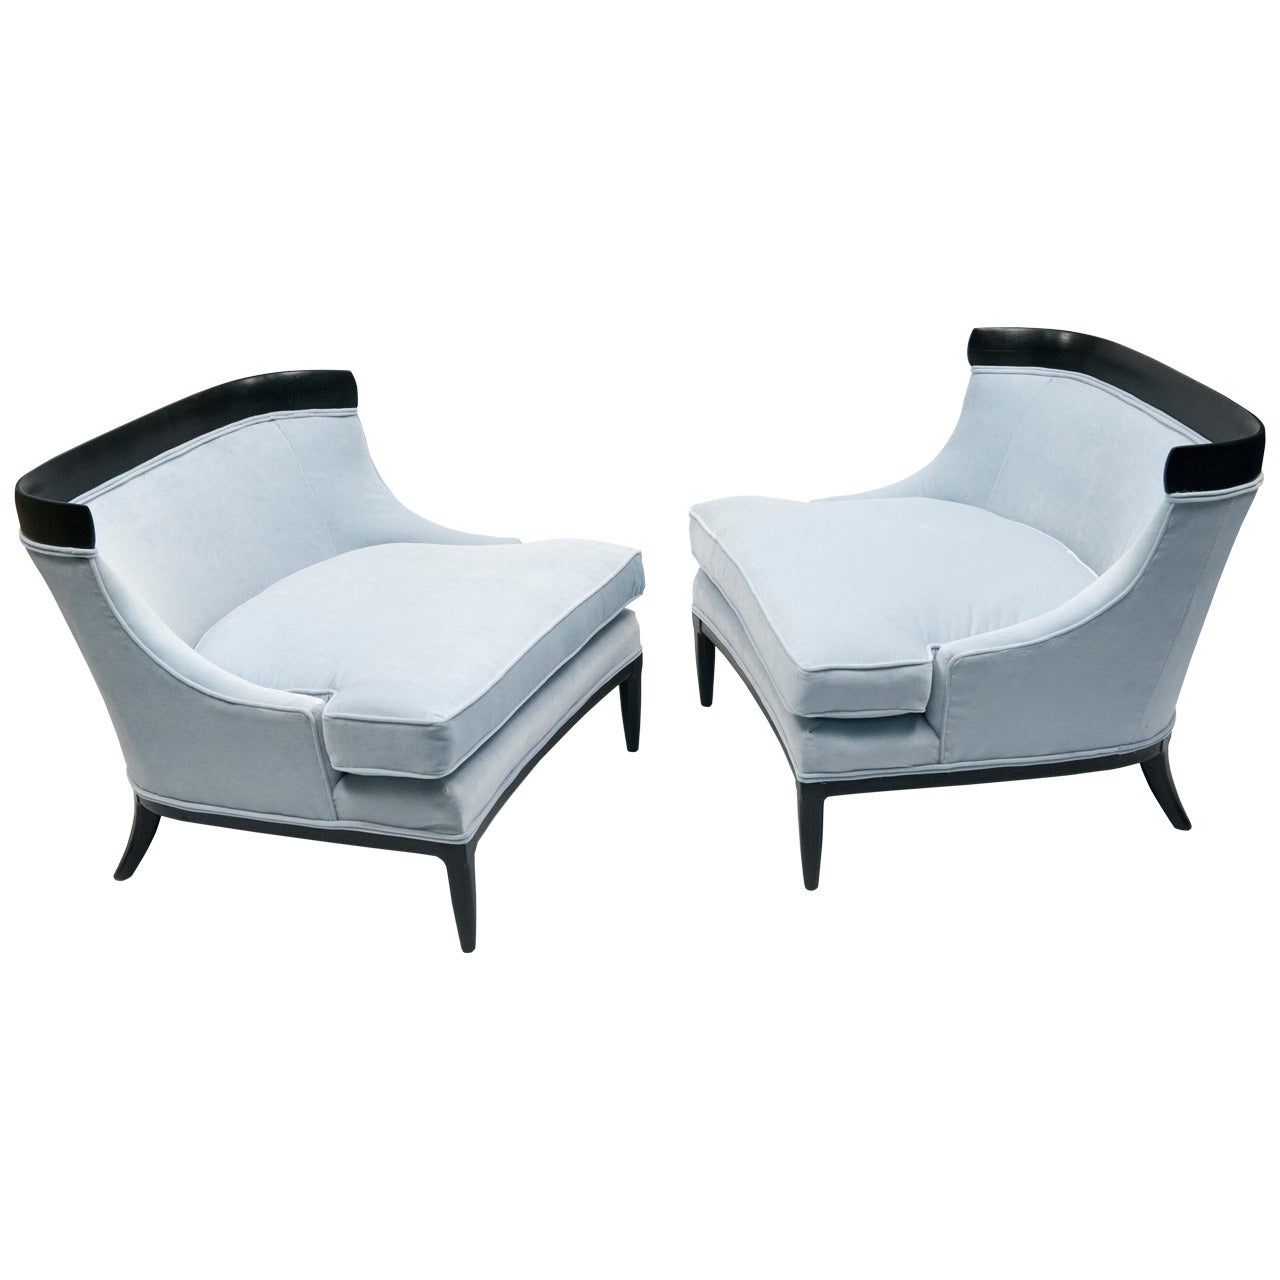 Pair of Tomlinson Sophisticate Lounge Chairs